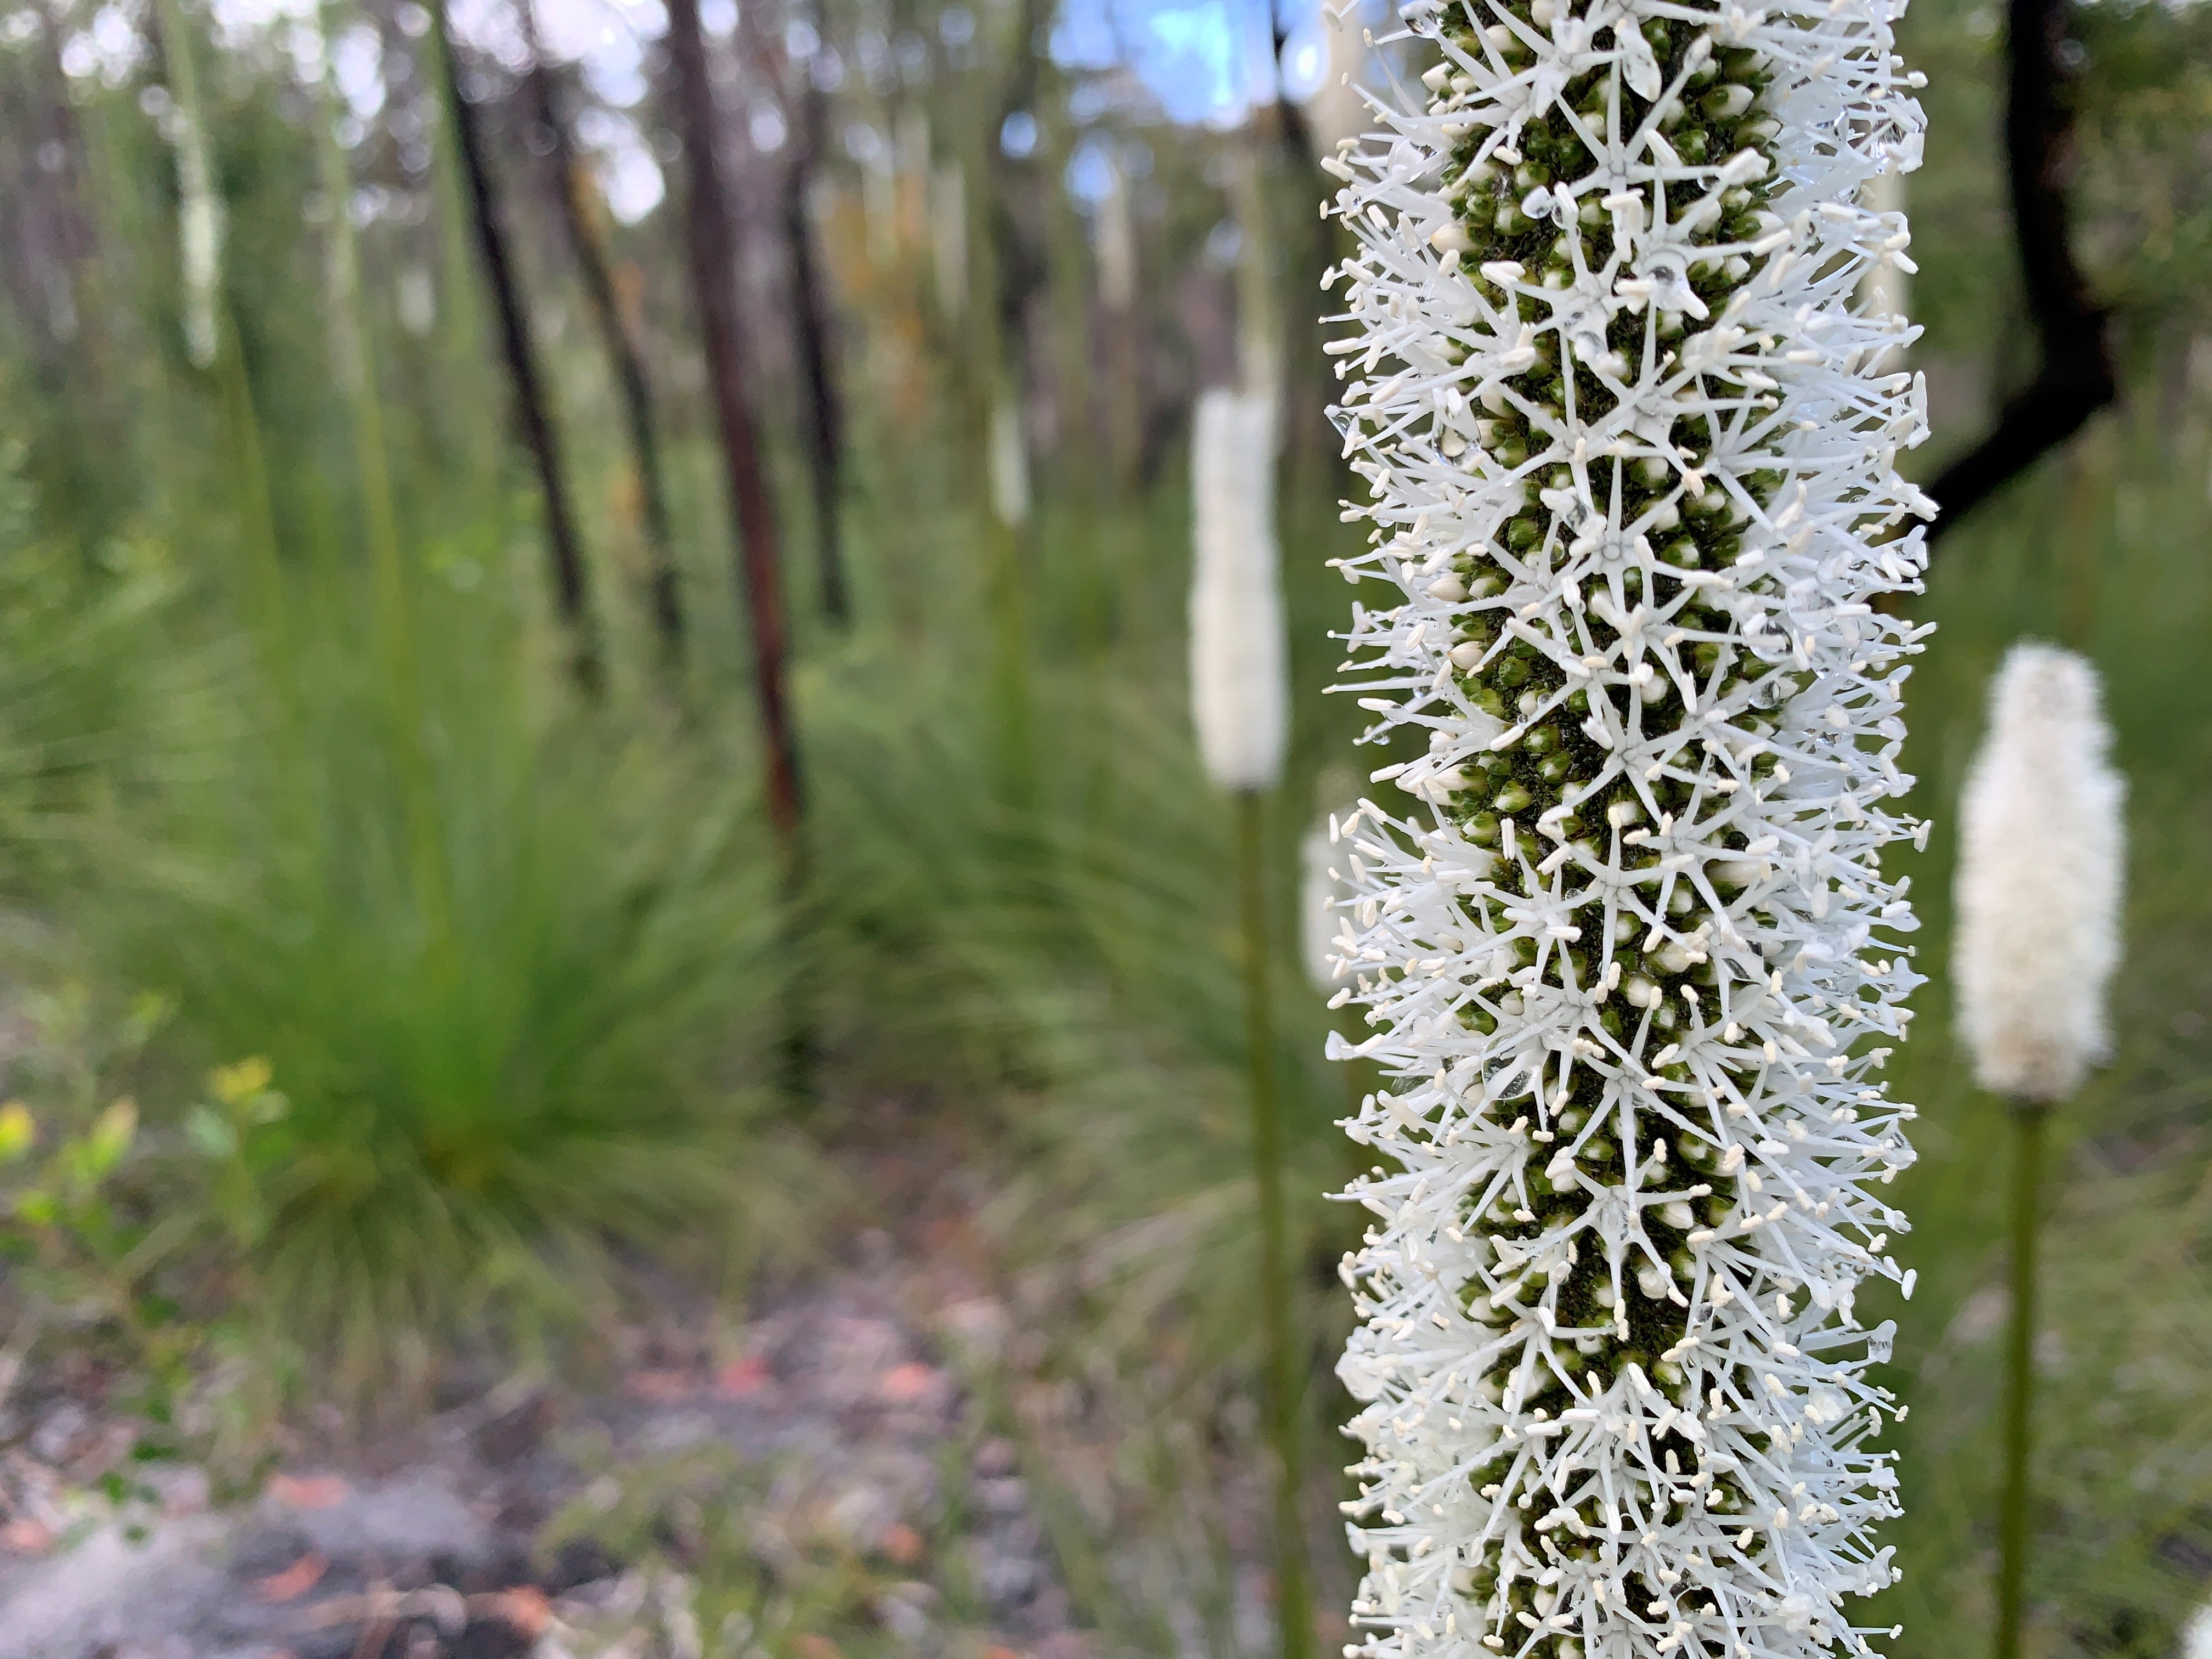 Flowering grass trees in the Great Sandy National Park, on Gubbi Gubbi Country.